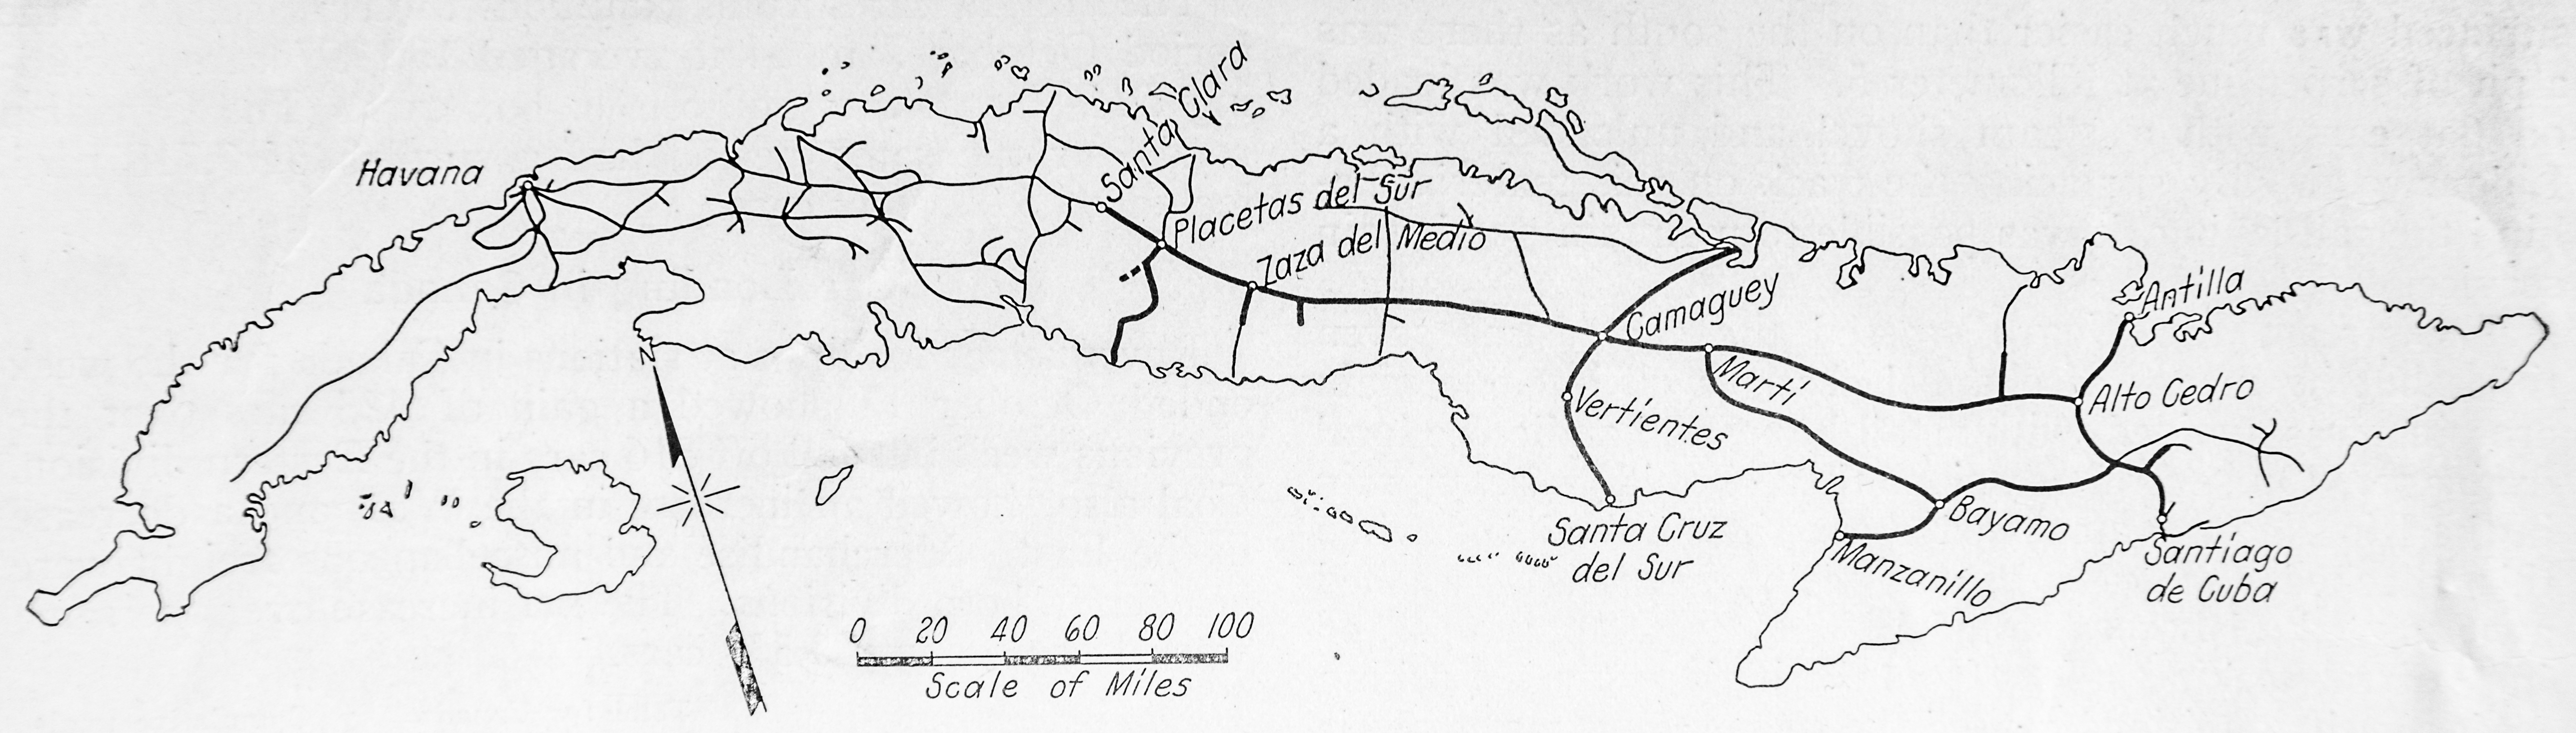 1925 Map of Cuba showing existing railroad lines, with the Cuba Railroad main line and branch lines shown with heavy lines